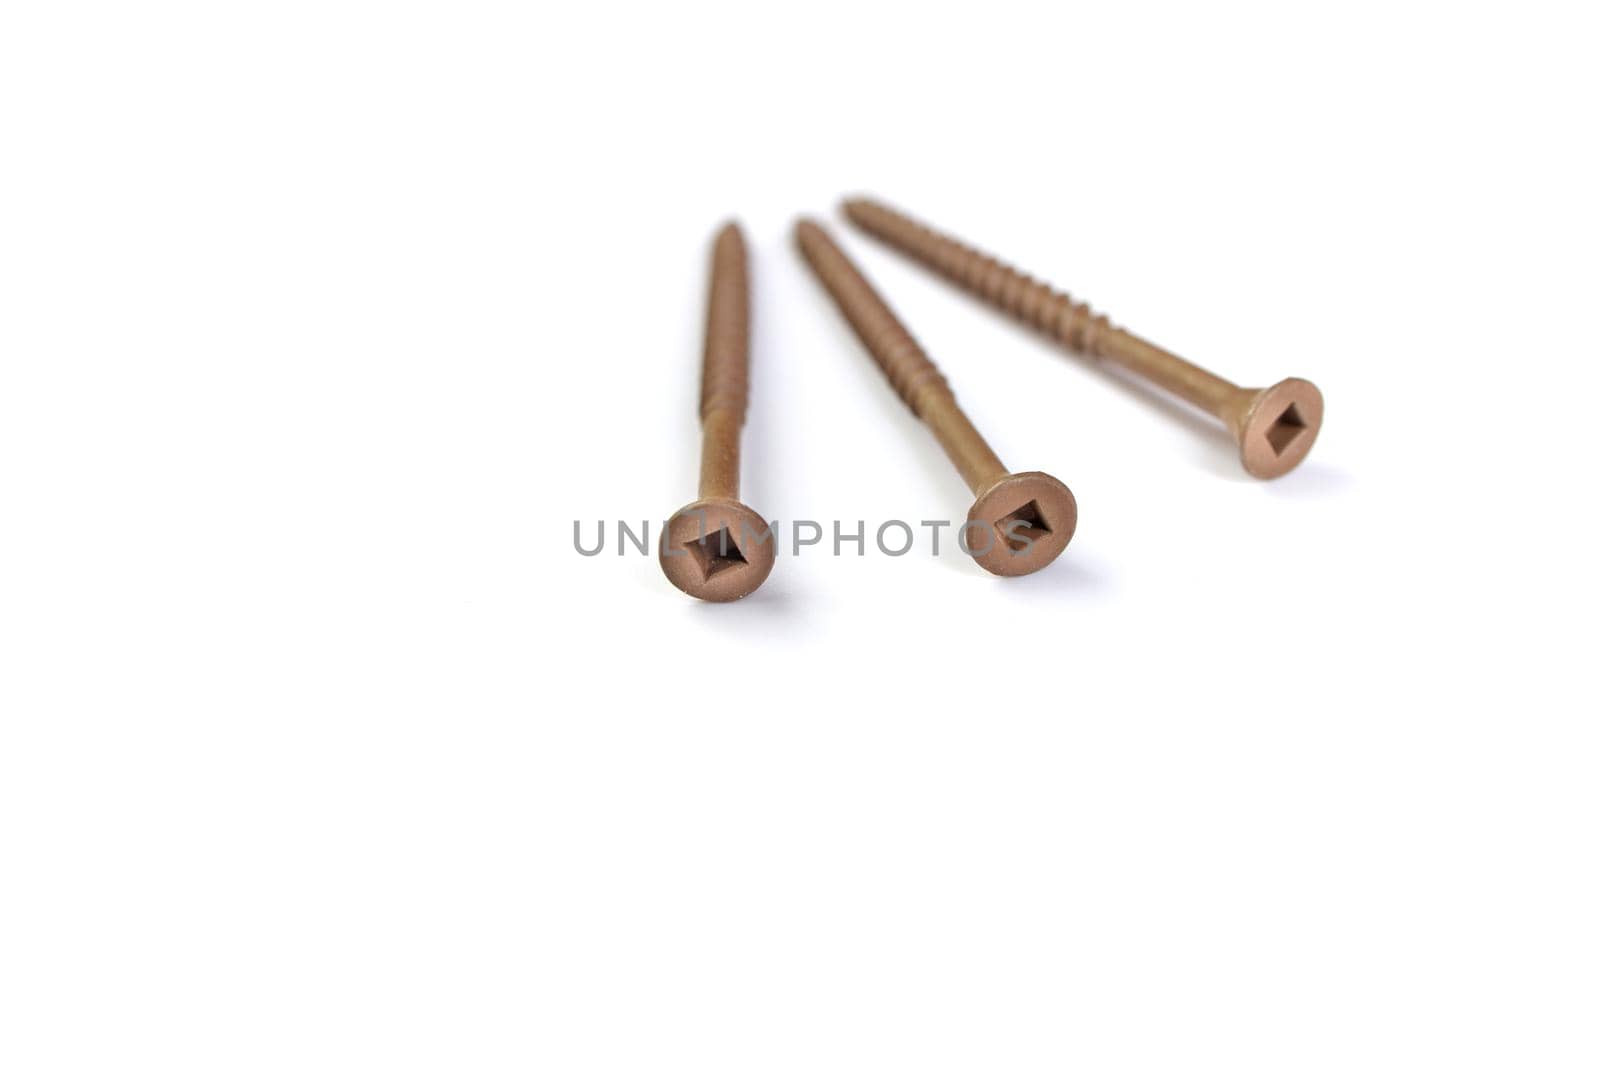 A pile of 3 inch Brown Deck Screws Isolated on a White Background. High quality photo